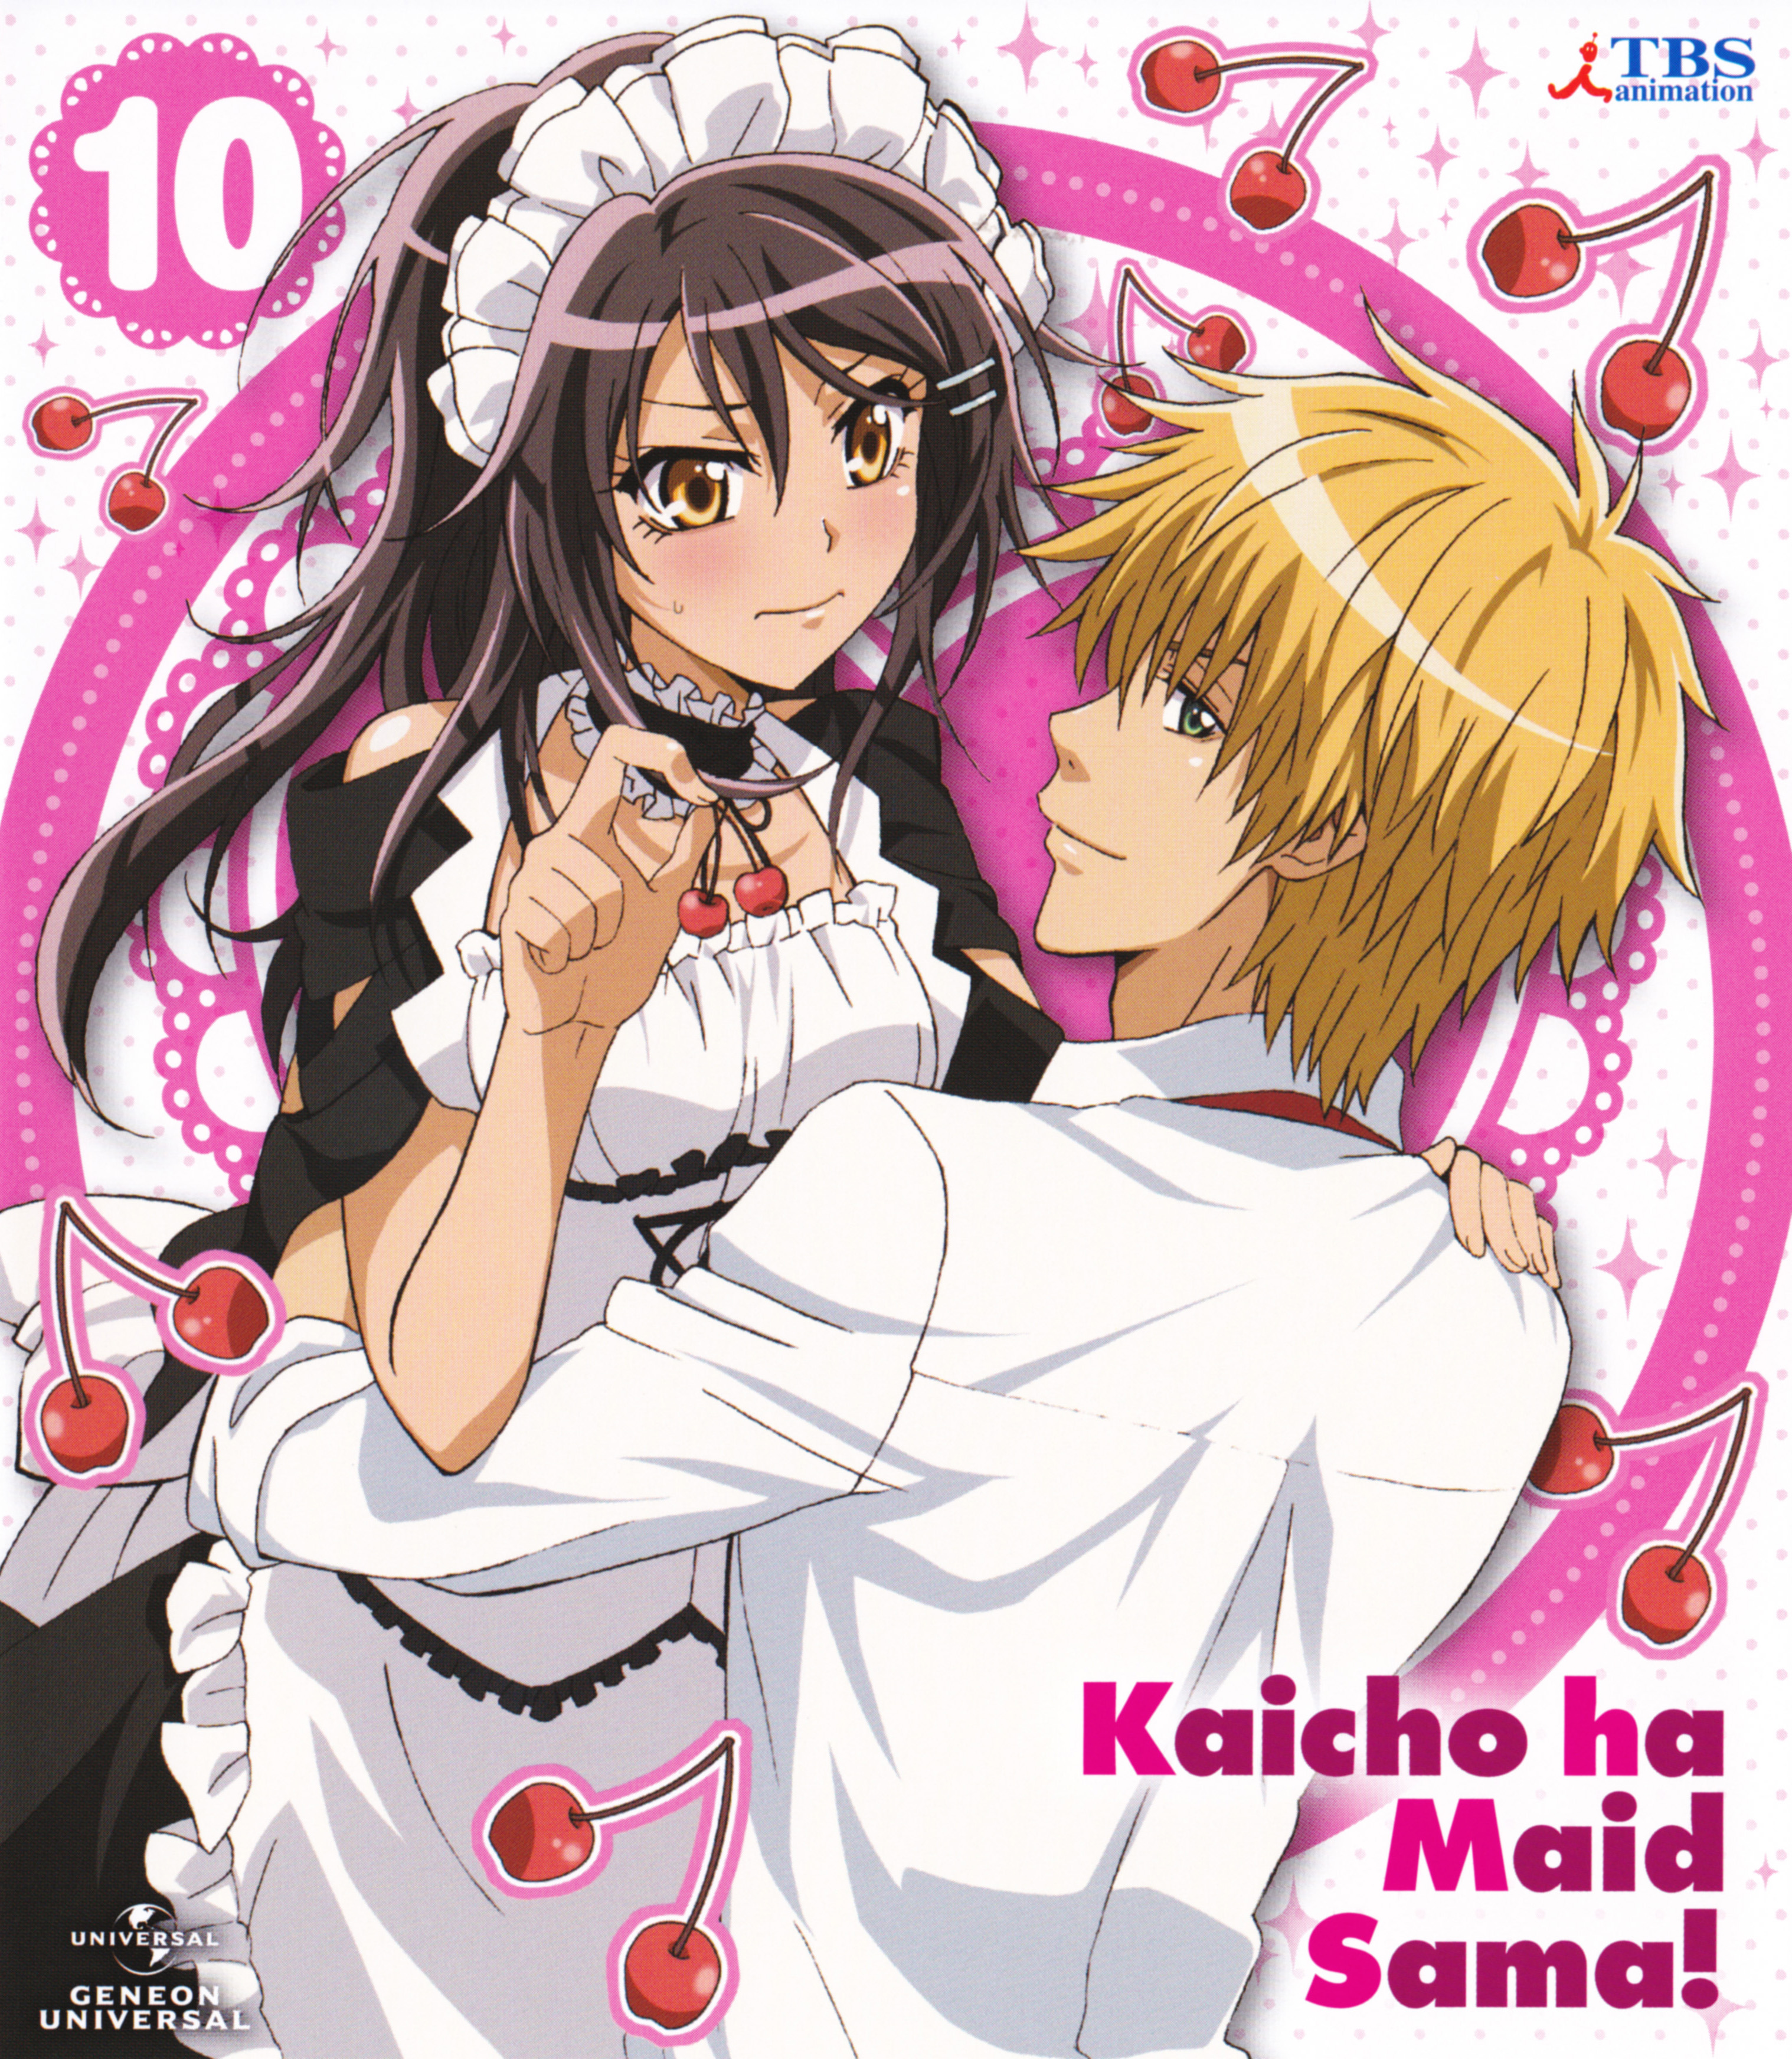 Amazing Maid Sama! Pictures & Backgrounds